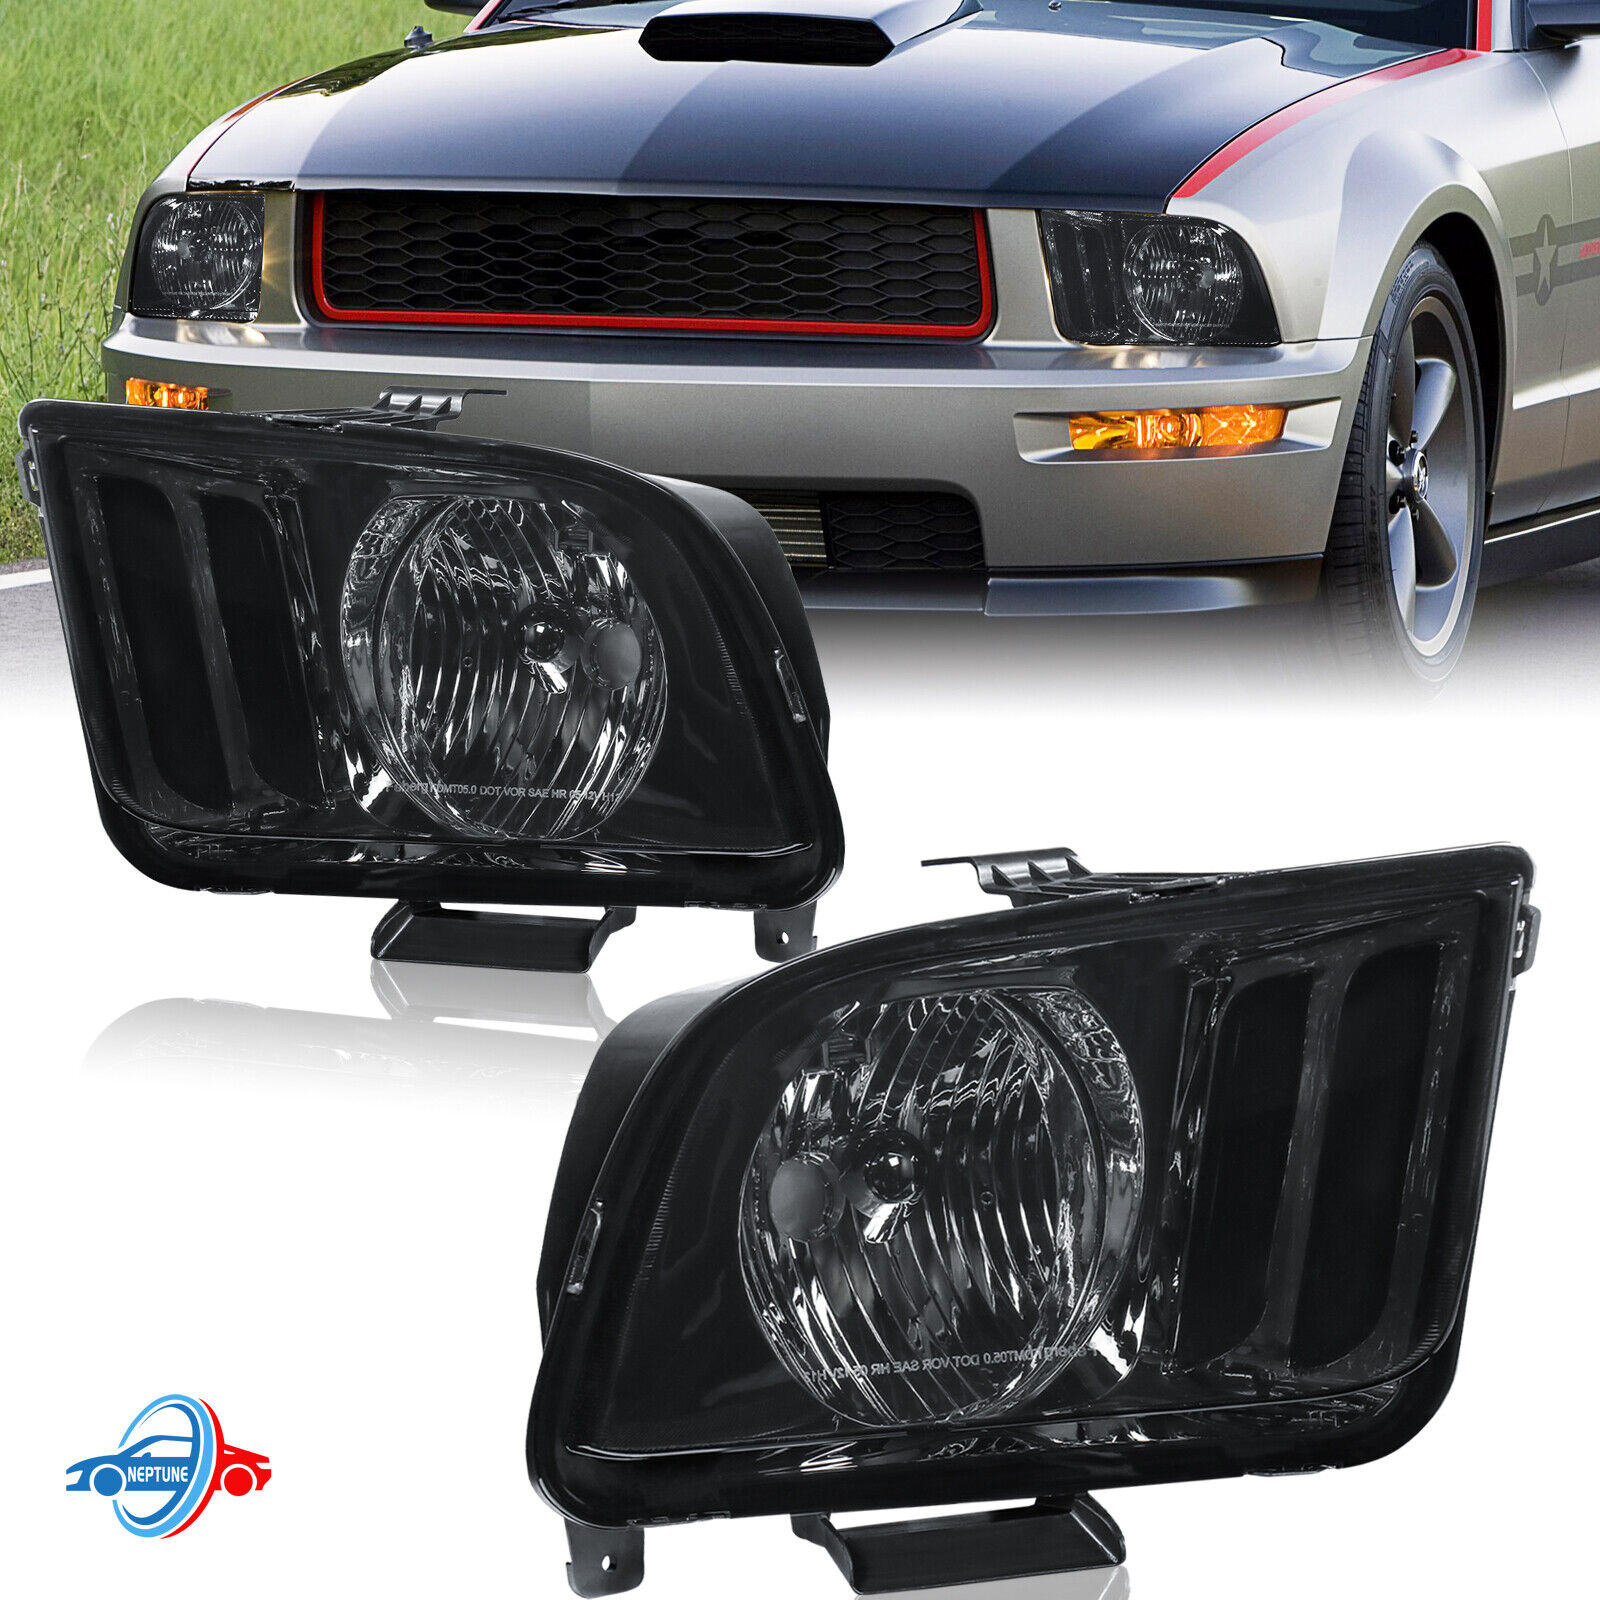 Smoke Lens Headlights For 2005-2009 Ford Mustang Headlamps Right & Left